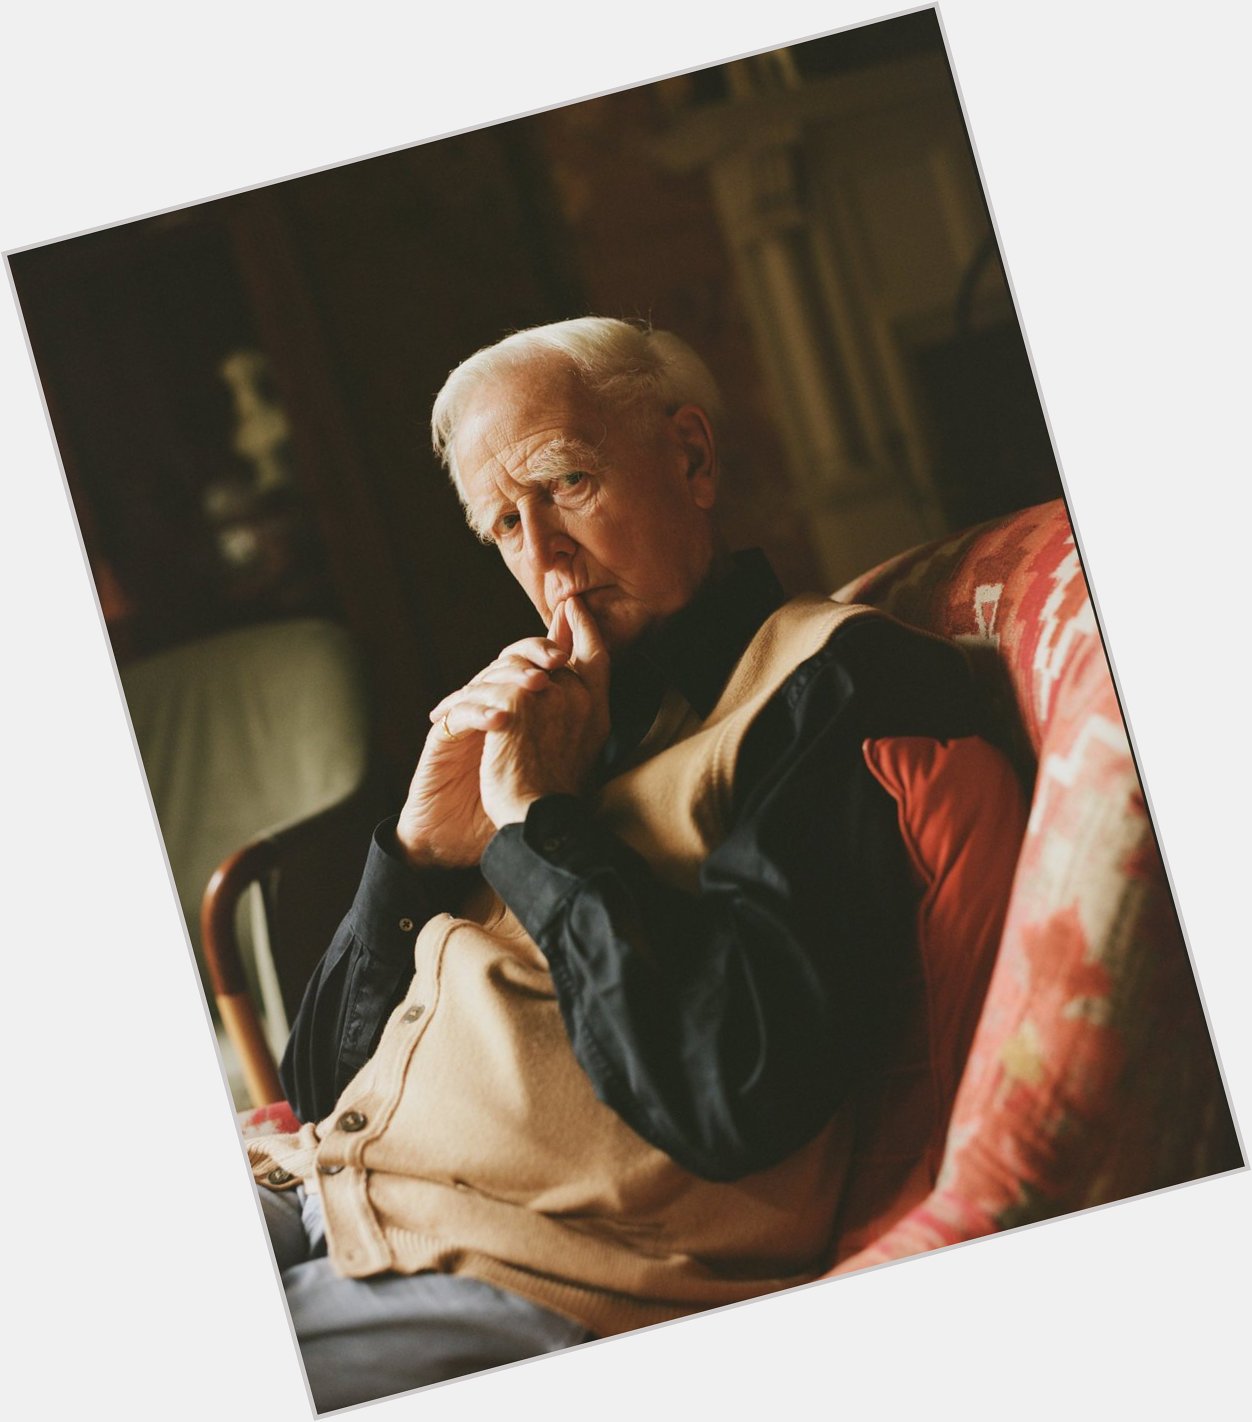 Happy birthday to one of the father\s of modern espionage thrillers John le Carré 